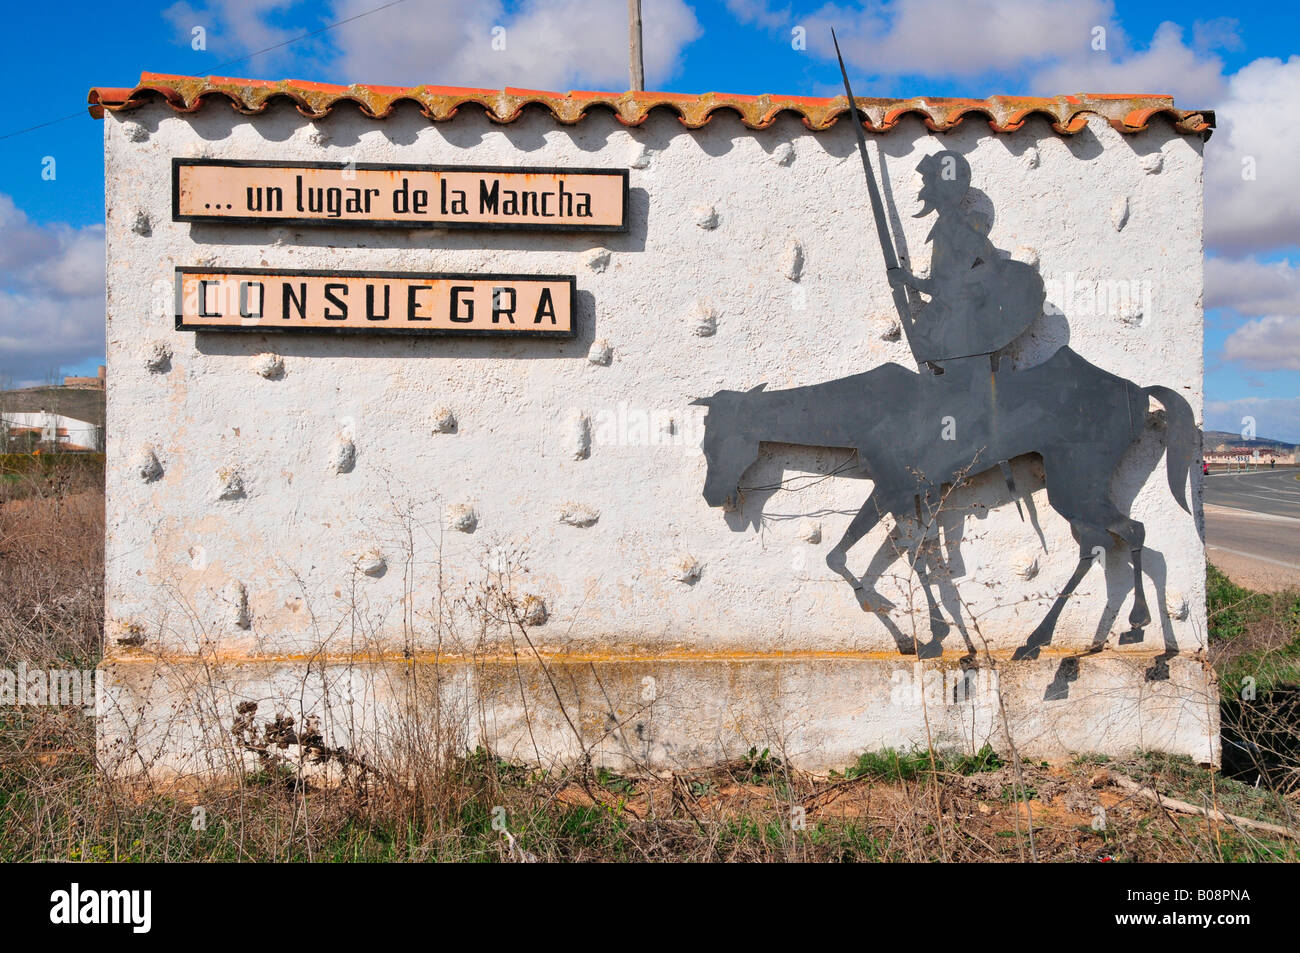 Sign with image of Don Quixote, Don Quijote at the town entrance of Consuegra, Castilla-La Mancha region, Spain Stock Photo